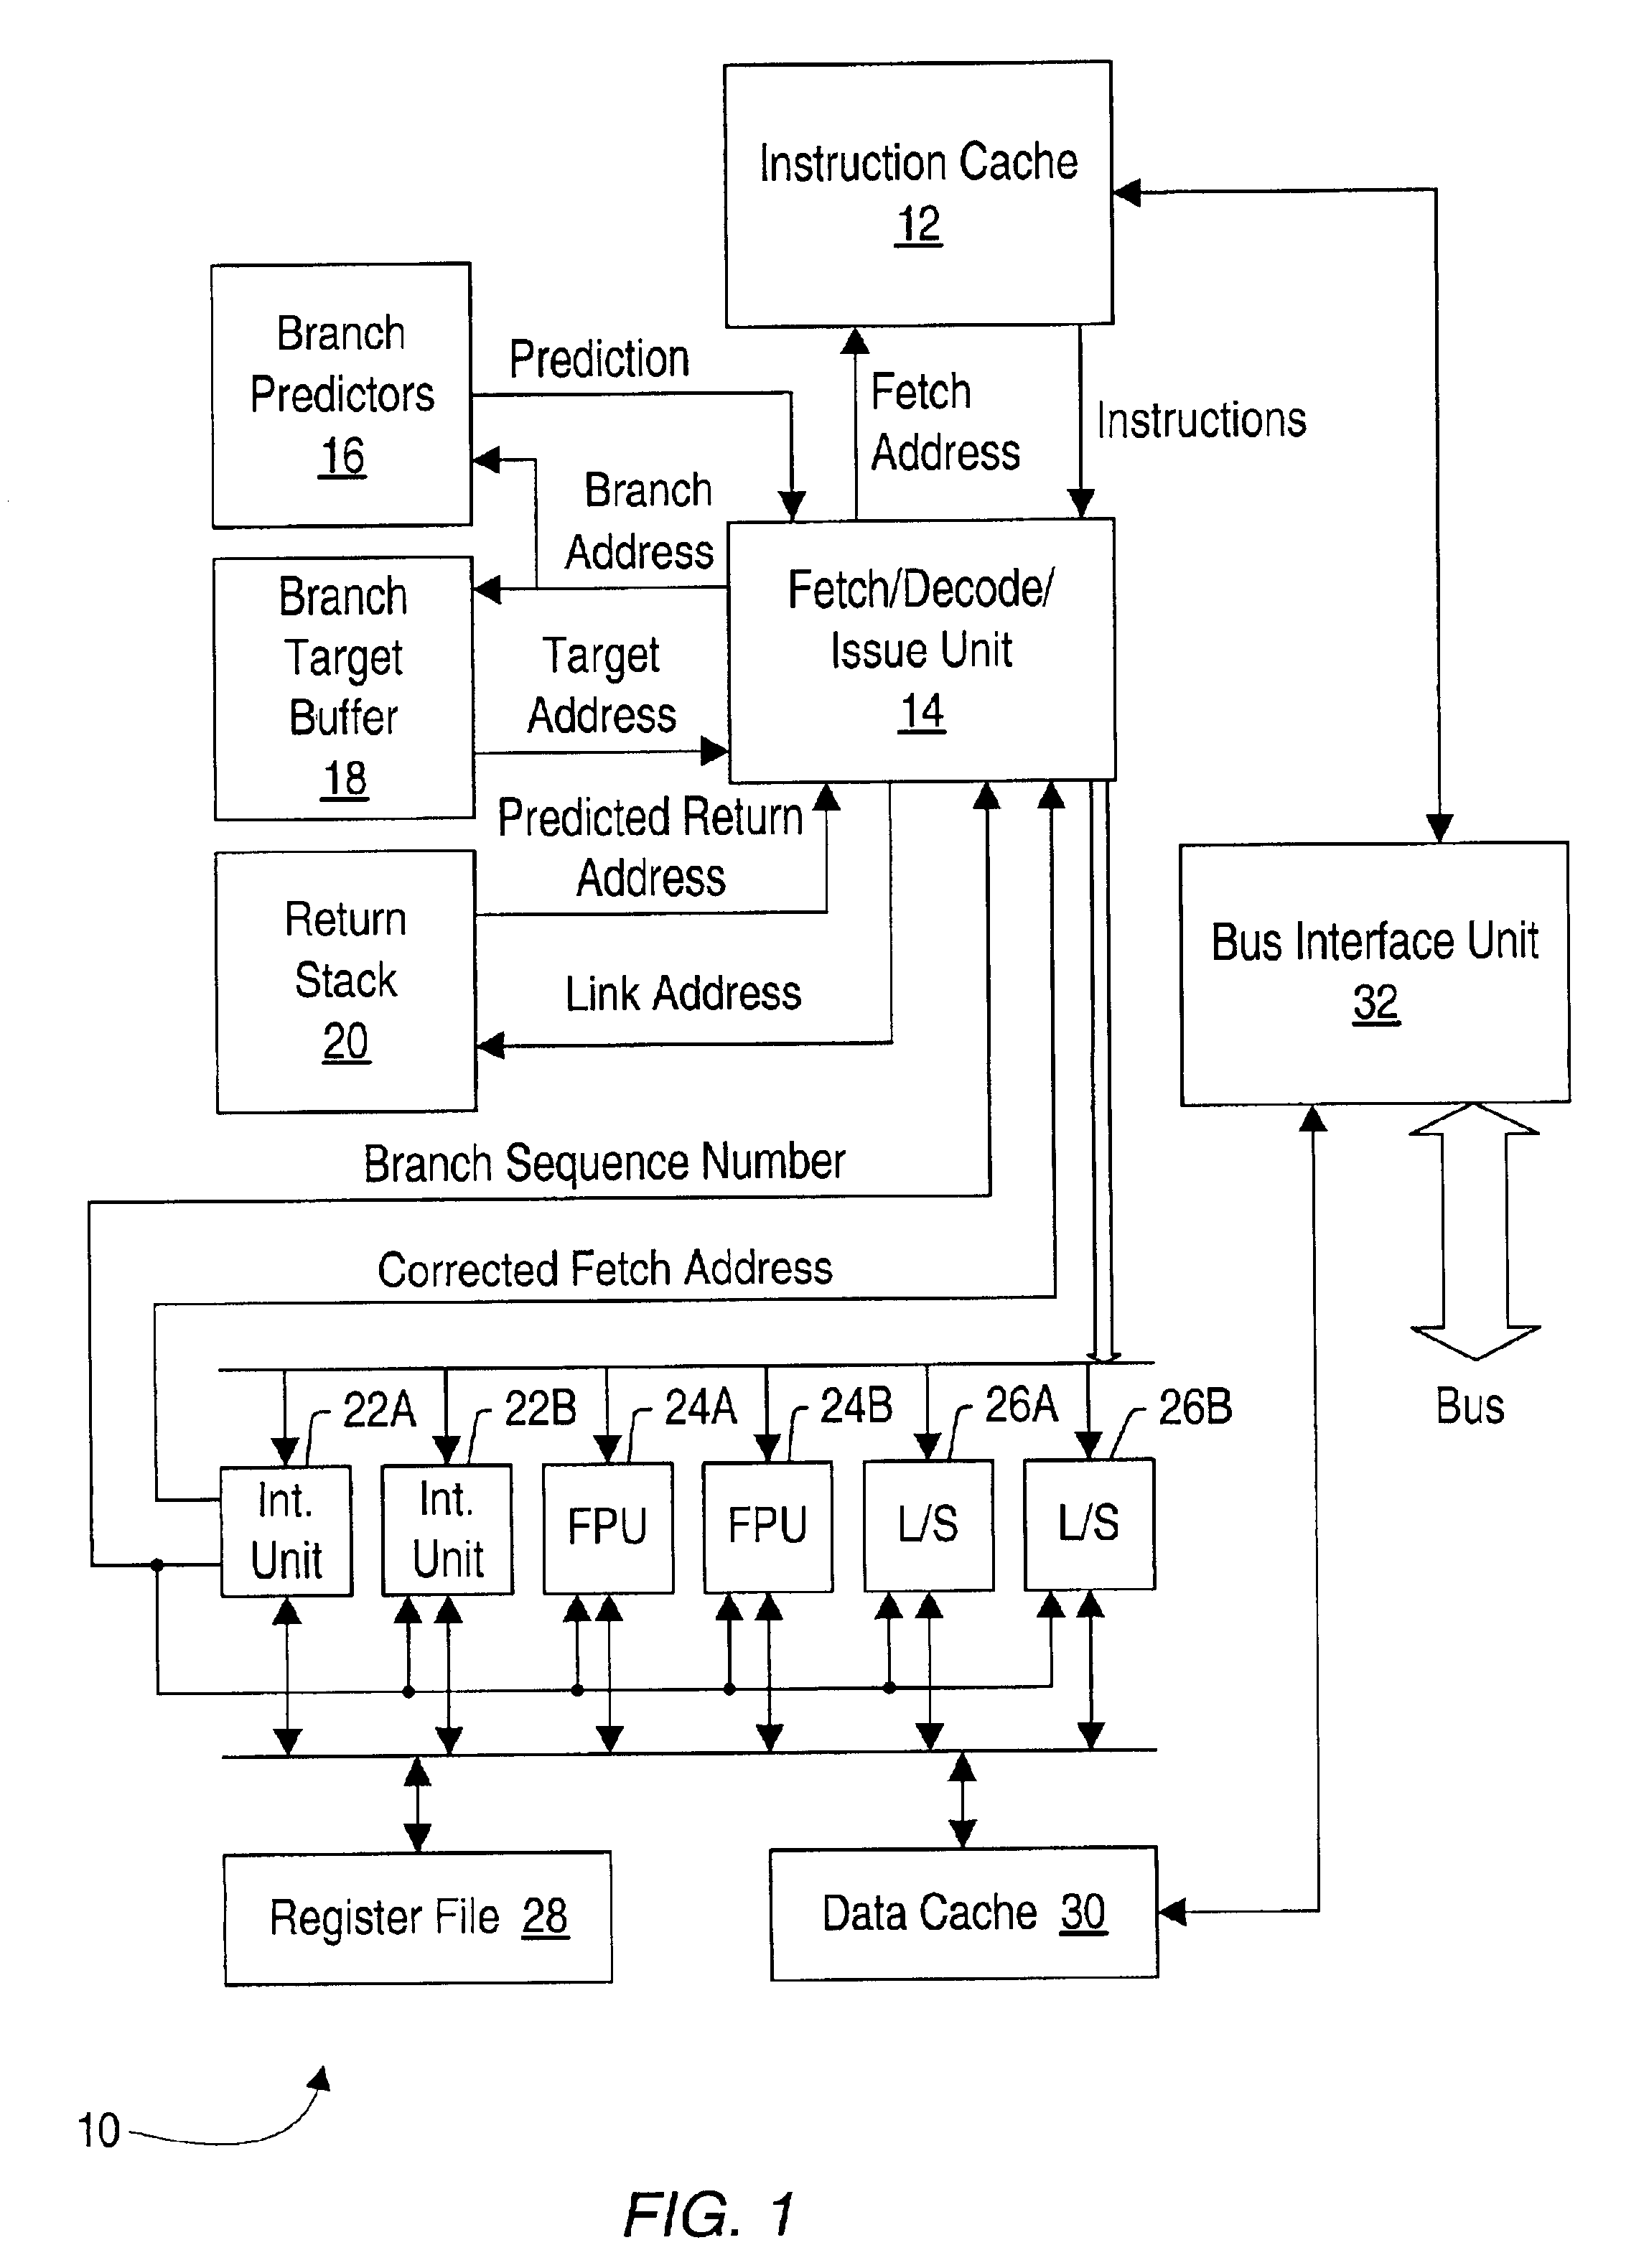 Method for cancelling conditional delay slot instructions